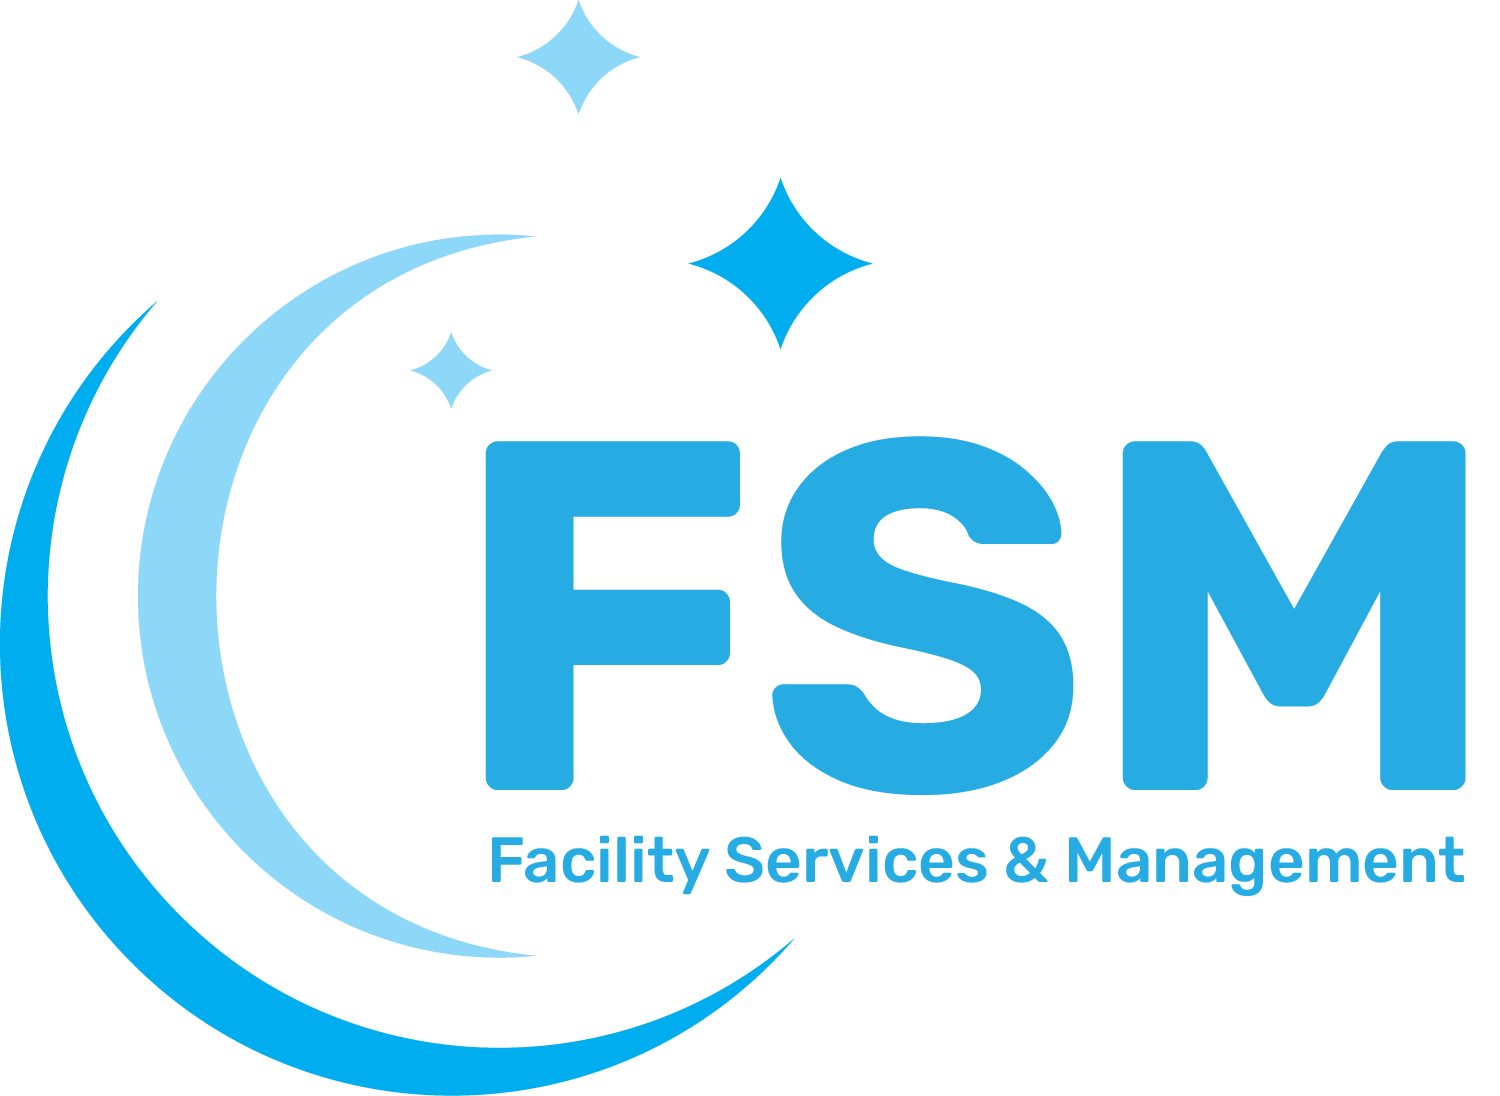 Facility Services and Management